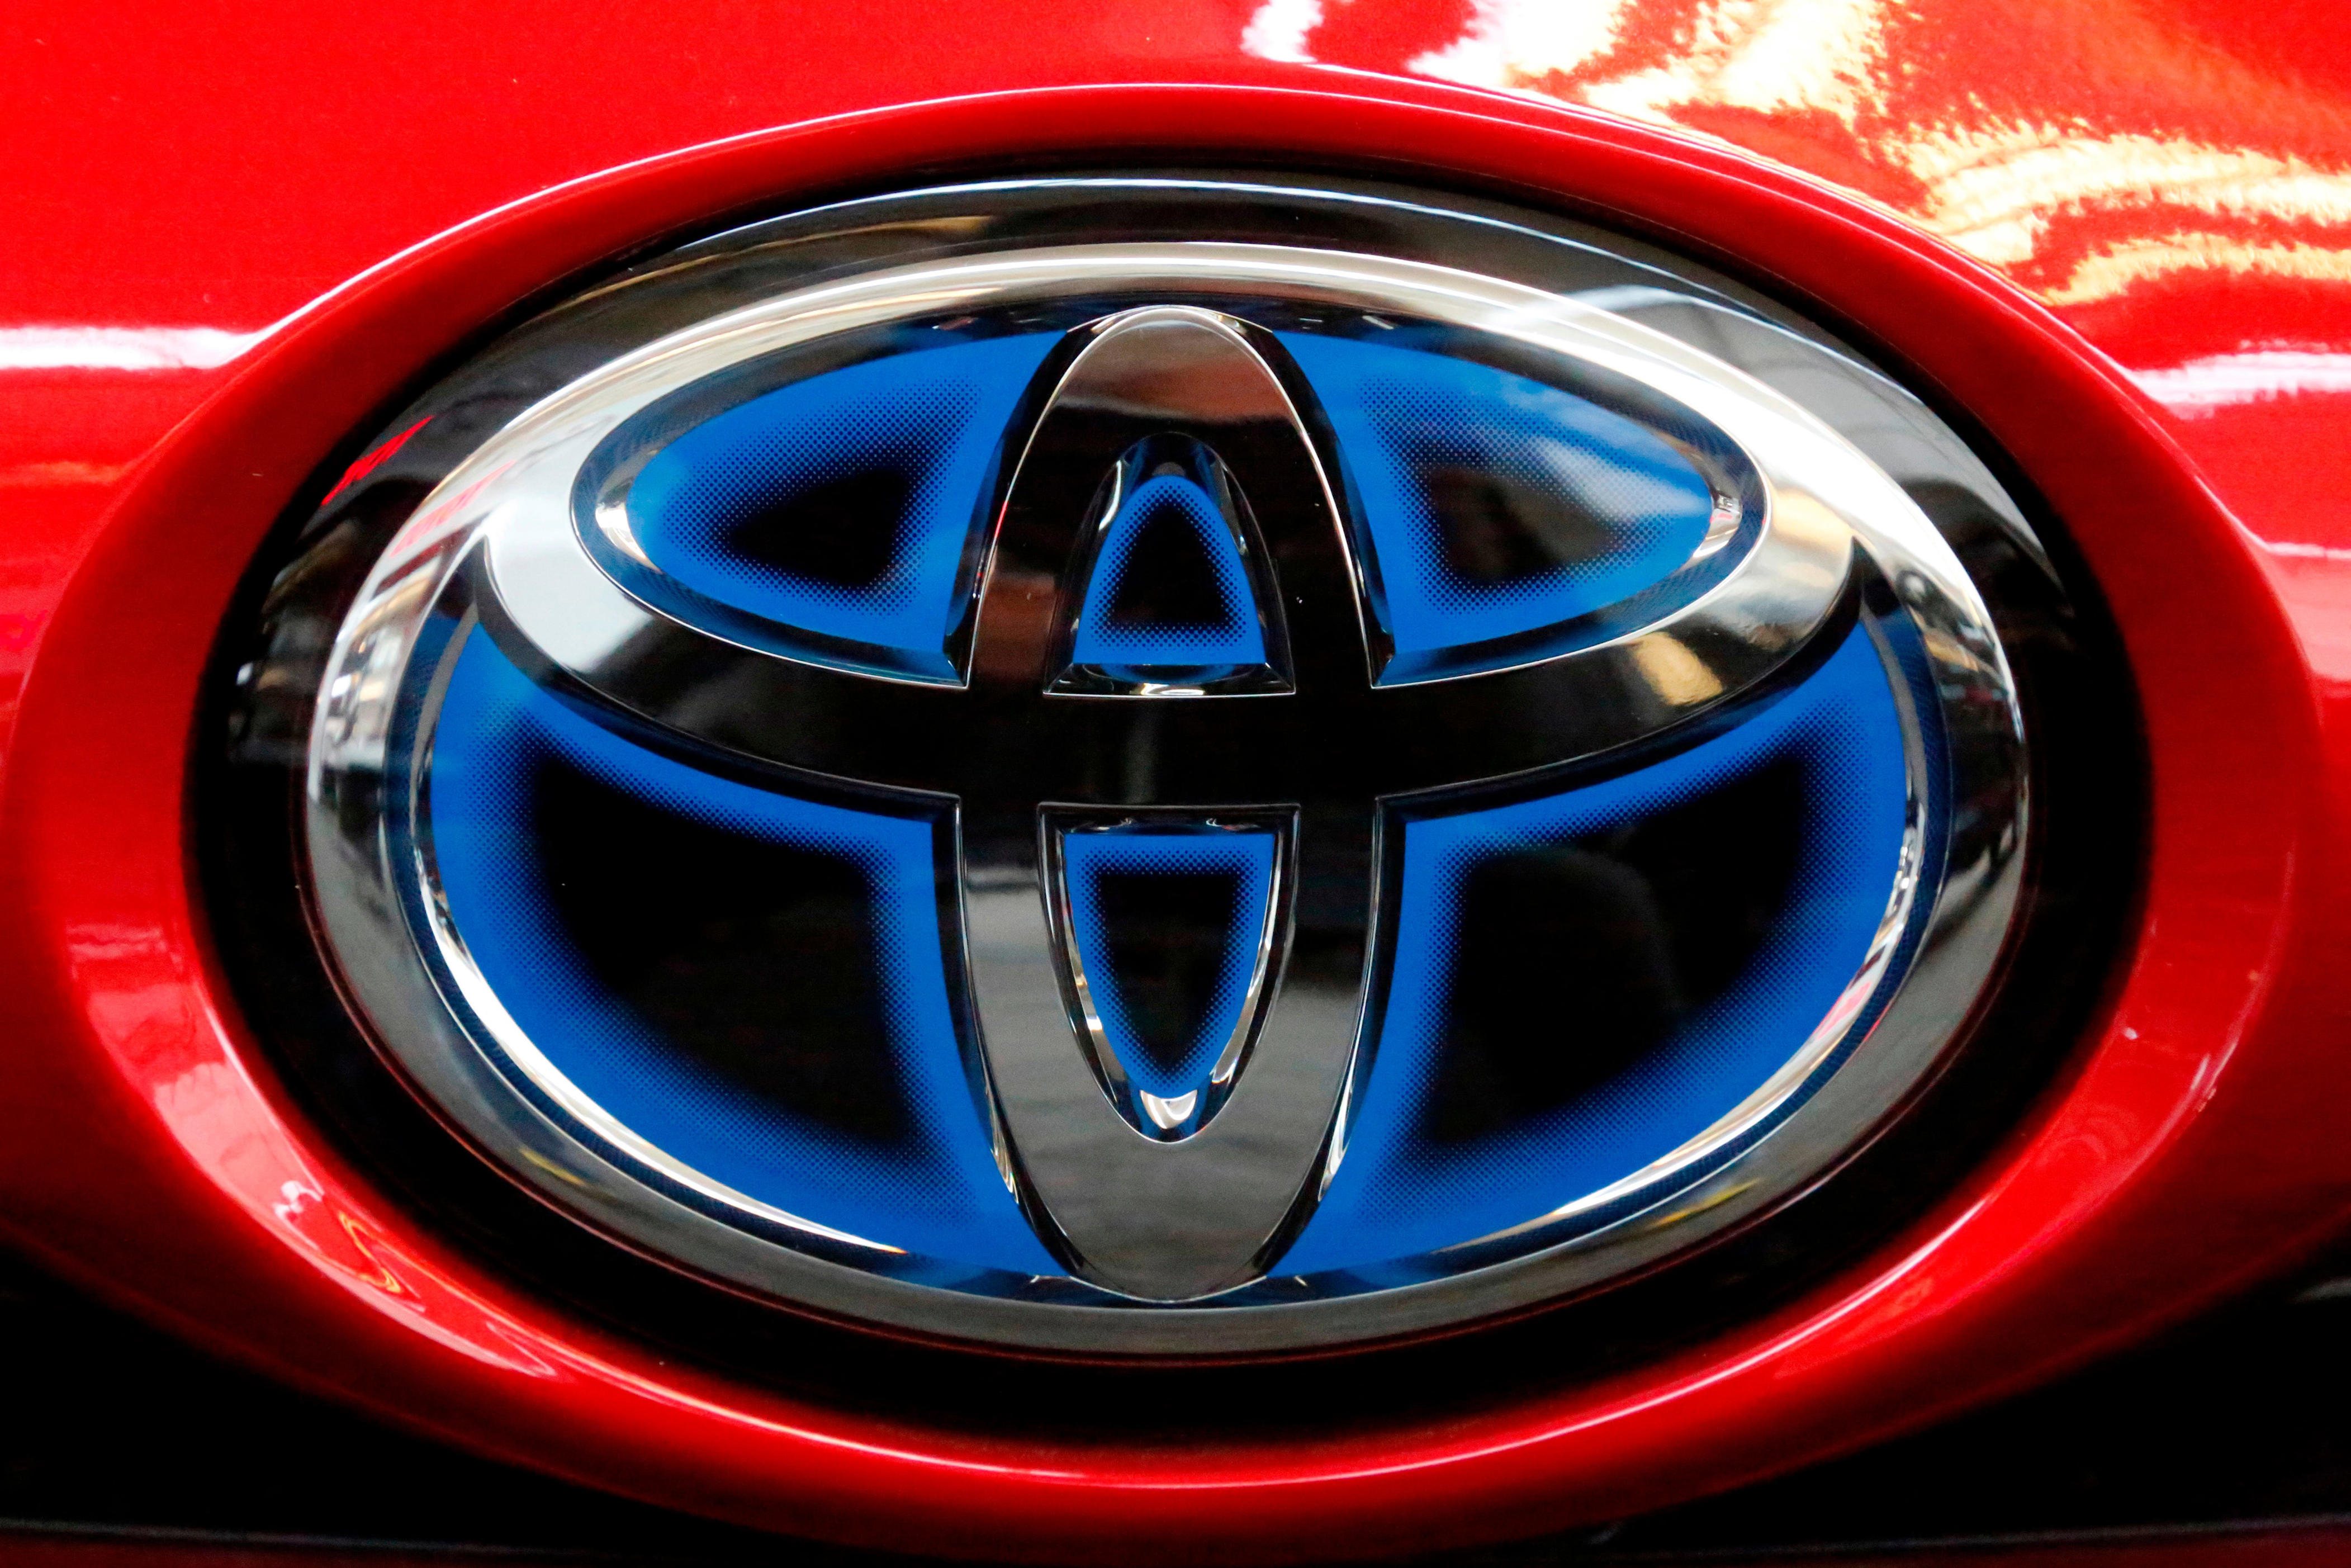 toyota recalls over 380,000 tacoma trucks over increased risk of crash, safety issue